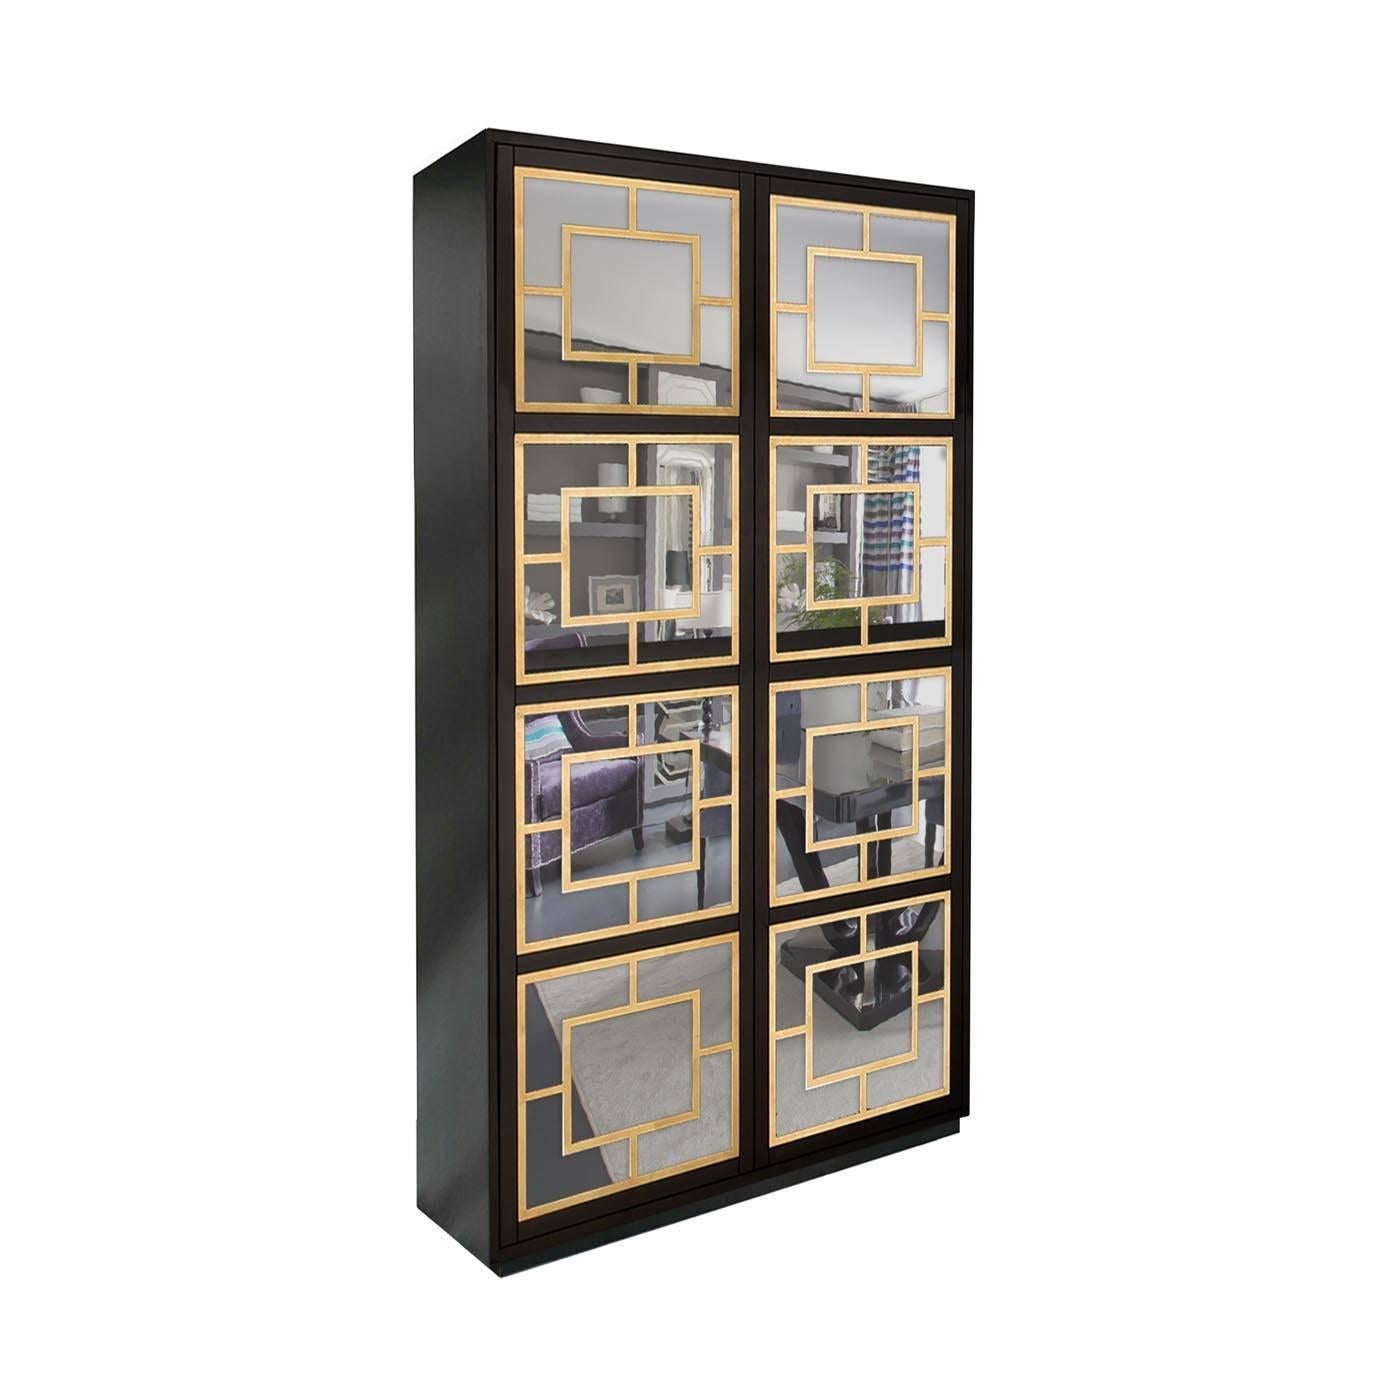 This two-door cabinet is handcrafted by expert artisans and has a simple structure with a plinth base and a striking matte black lacquer finish. It features two mirrored front panels with a push-to-open mechanism, overlaid with gold leaf